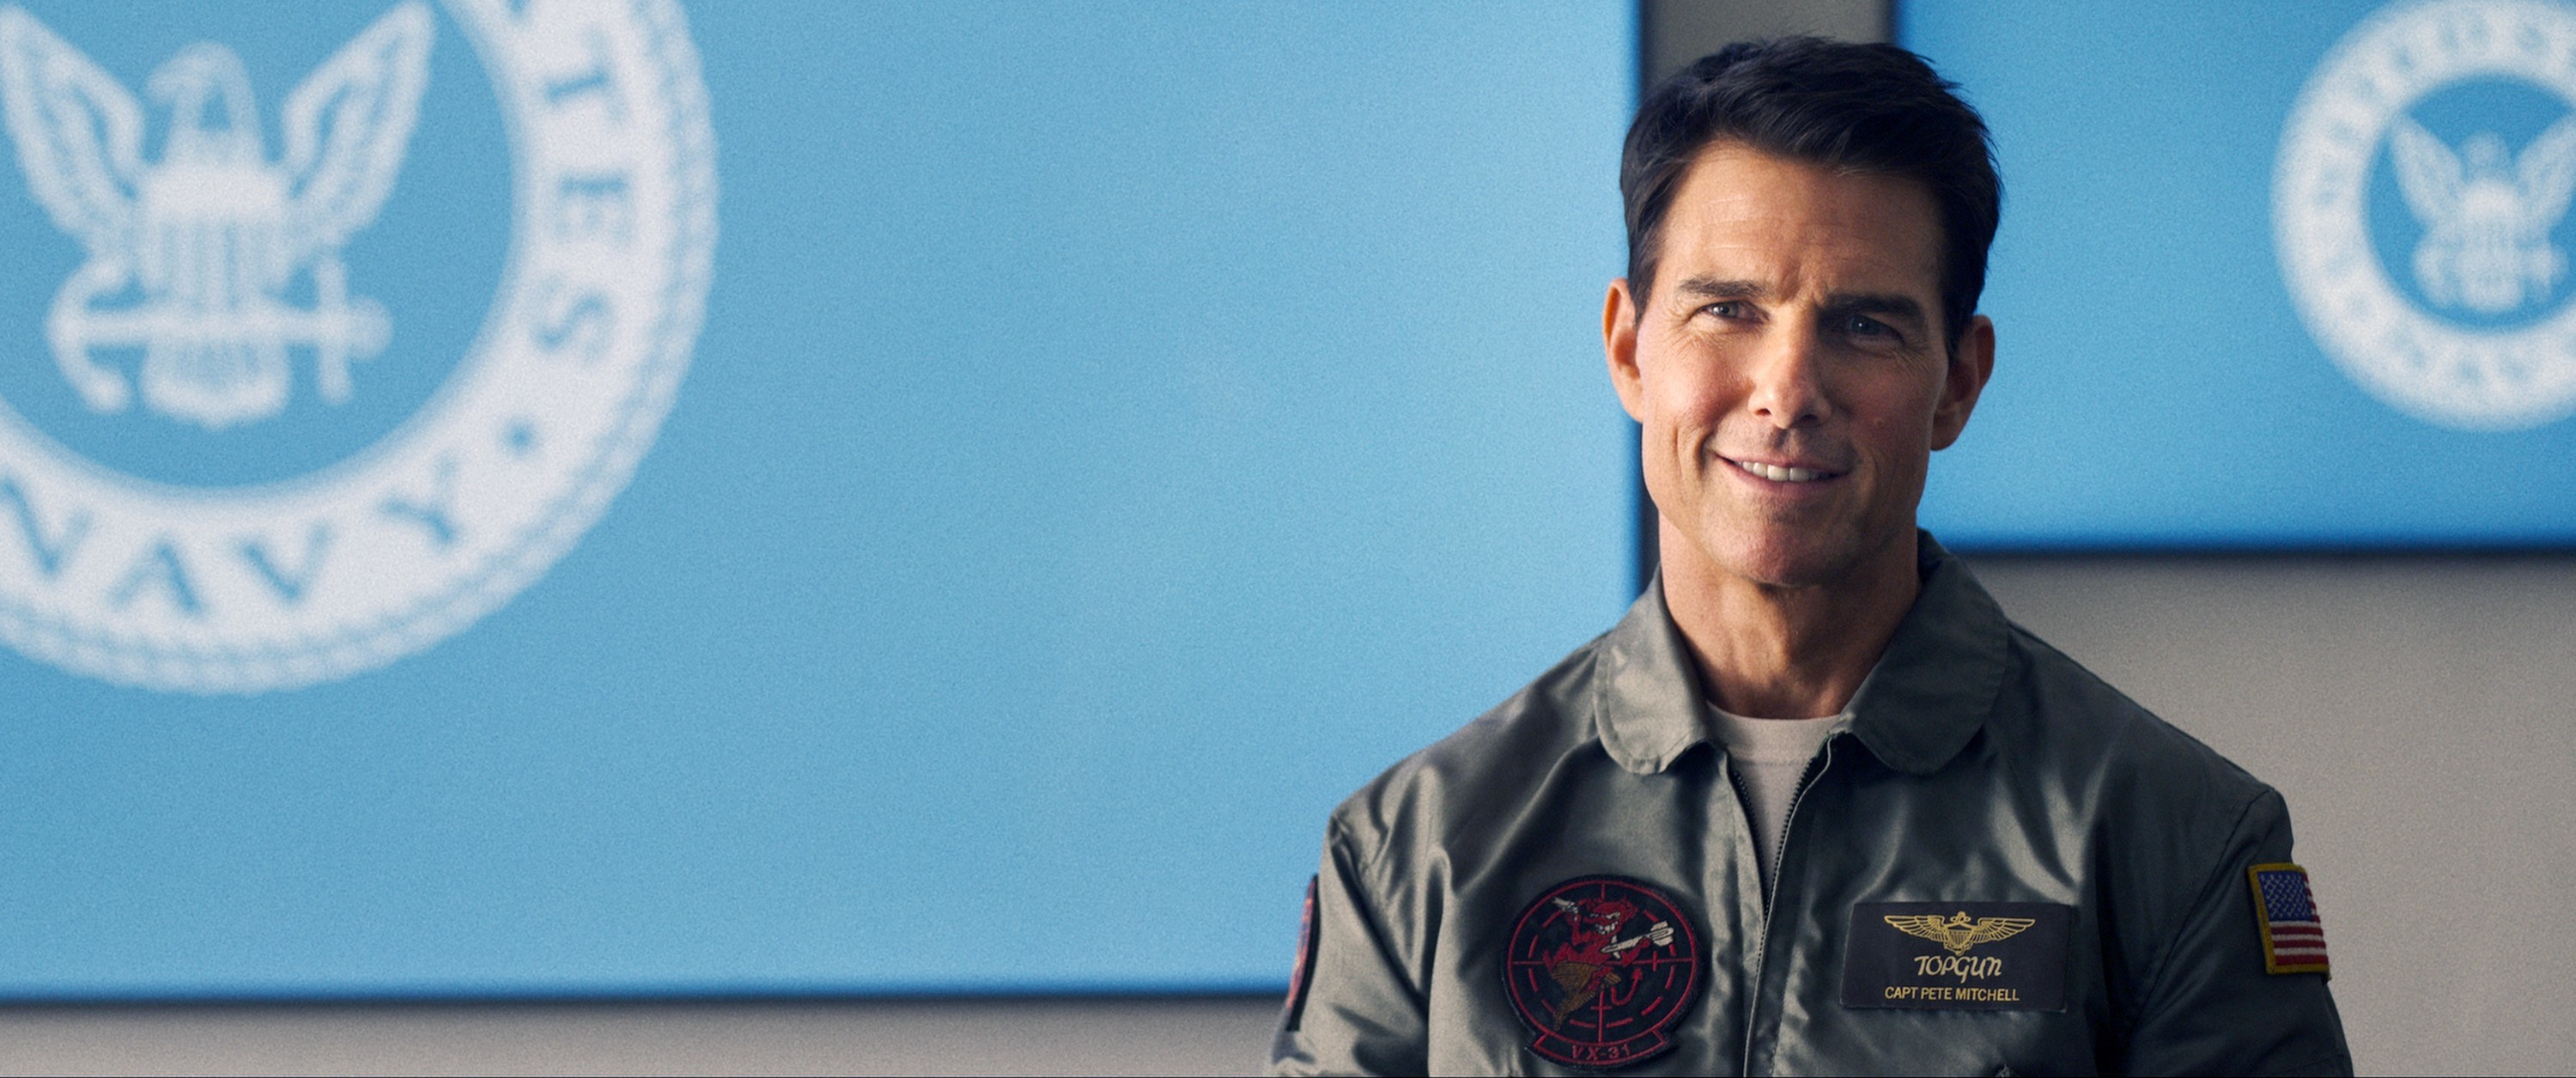 Tom Cruise stands in front of a screen